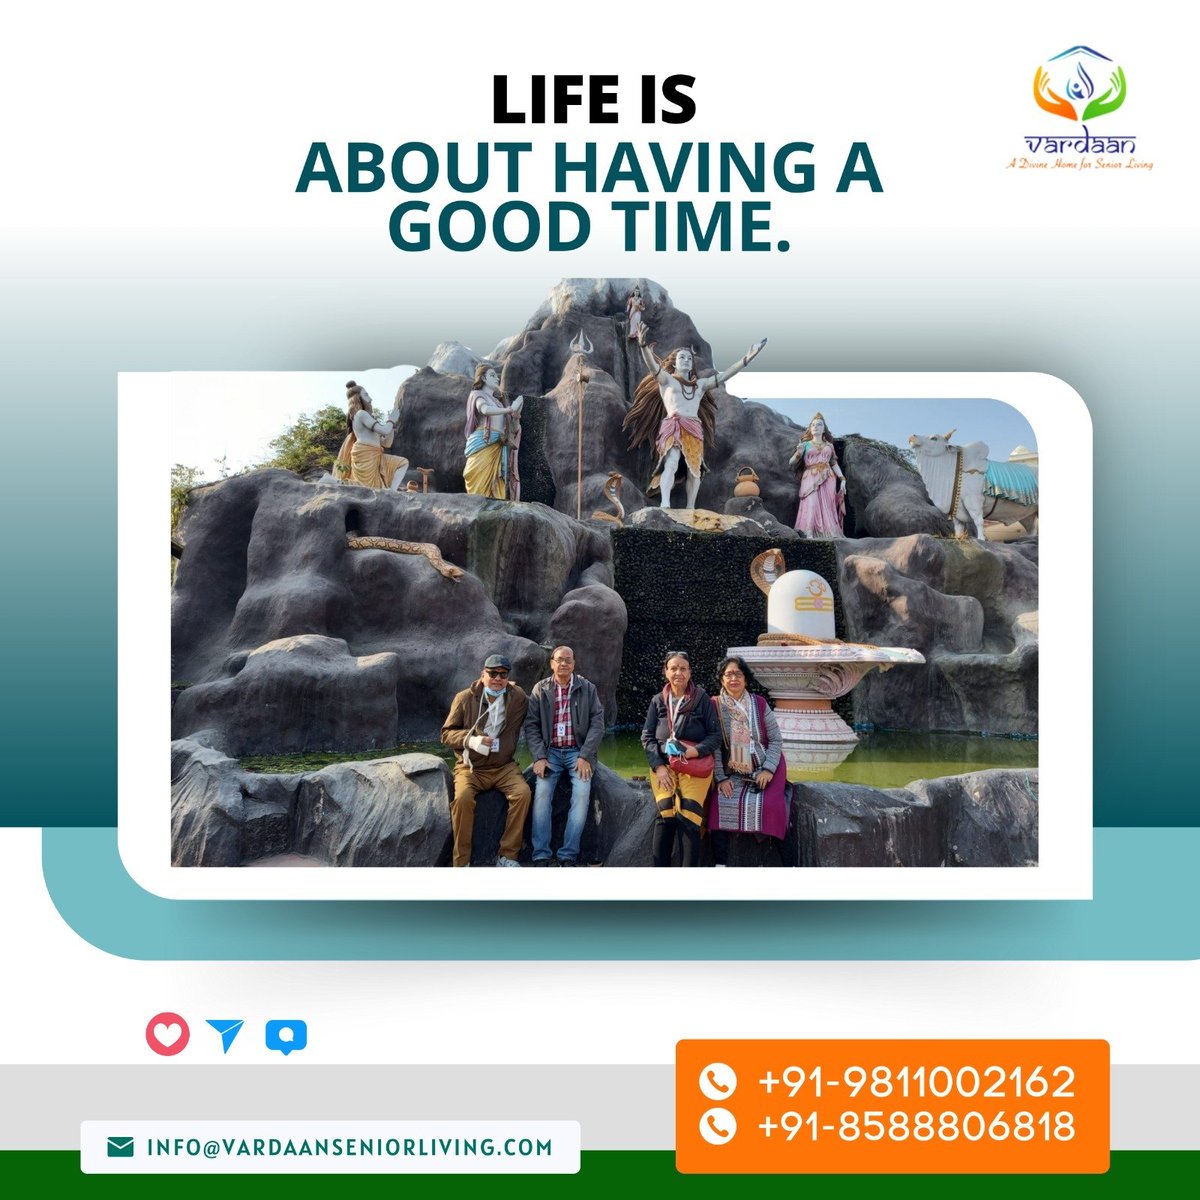 Life is about having a good time
For more details
Visit our website- vardaanseniorliving.com
Call @ 9811002162, 8588806818
or mail us at info@vardaanseniorliving.com

#Vardaanseniorliving #elderlycare #SeniorLivingIndia #seniorlivingcommunity #artctiveSeniorLiving #LifeIsShort